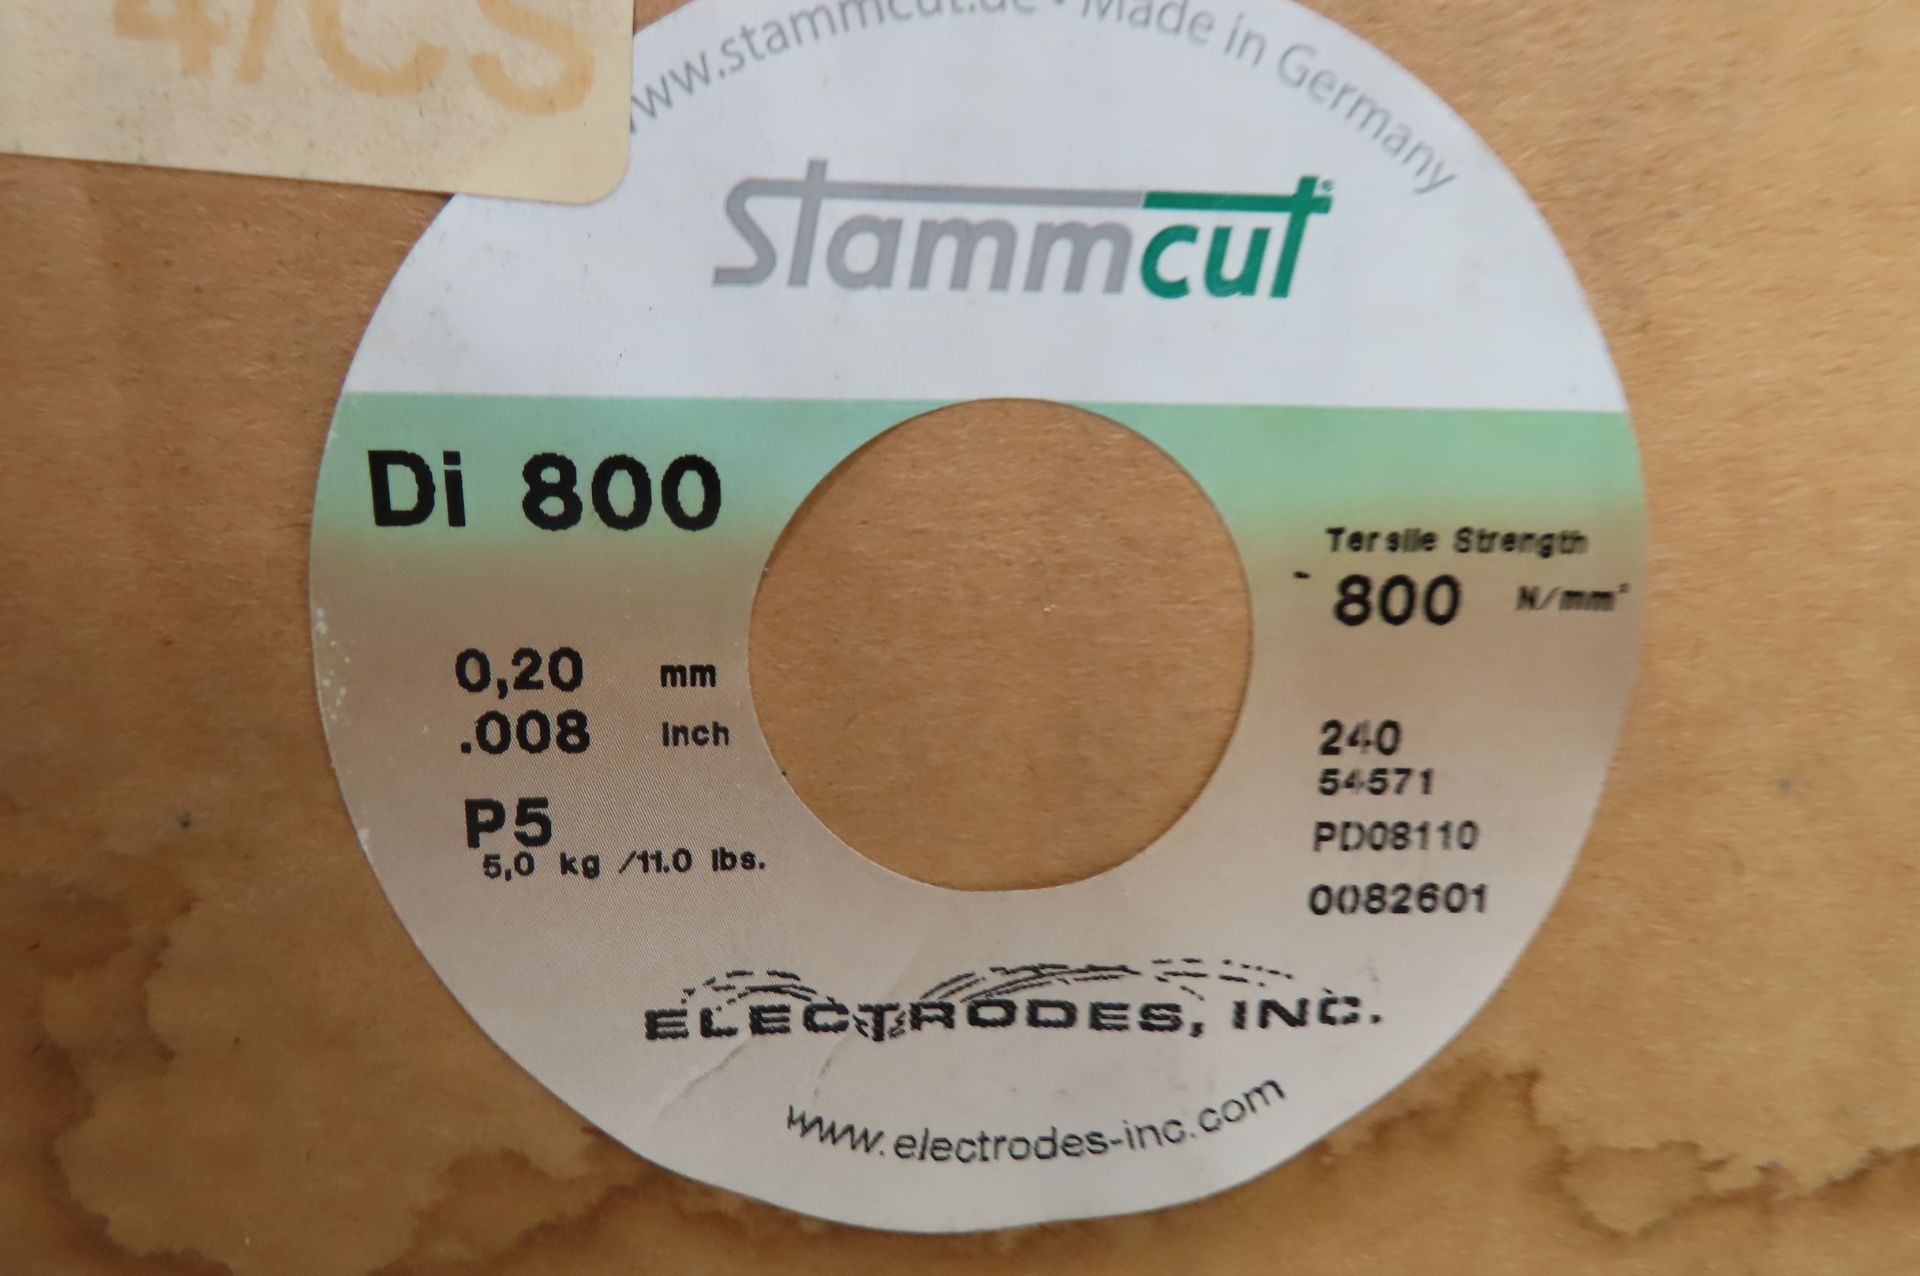 (18) STAMMCUT DI800 0.20 MM WIRE REELS - Image 3 of 3